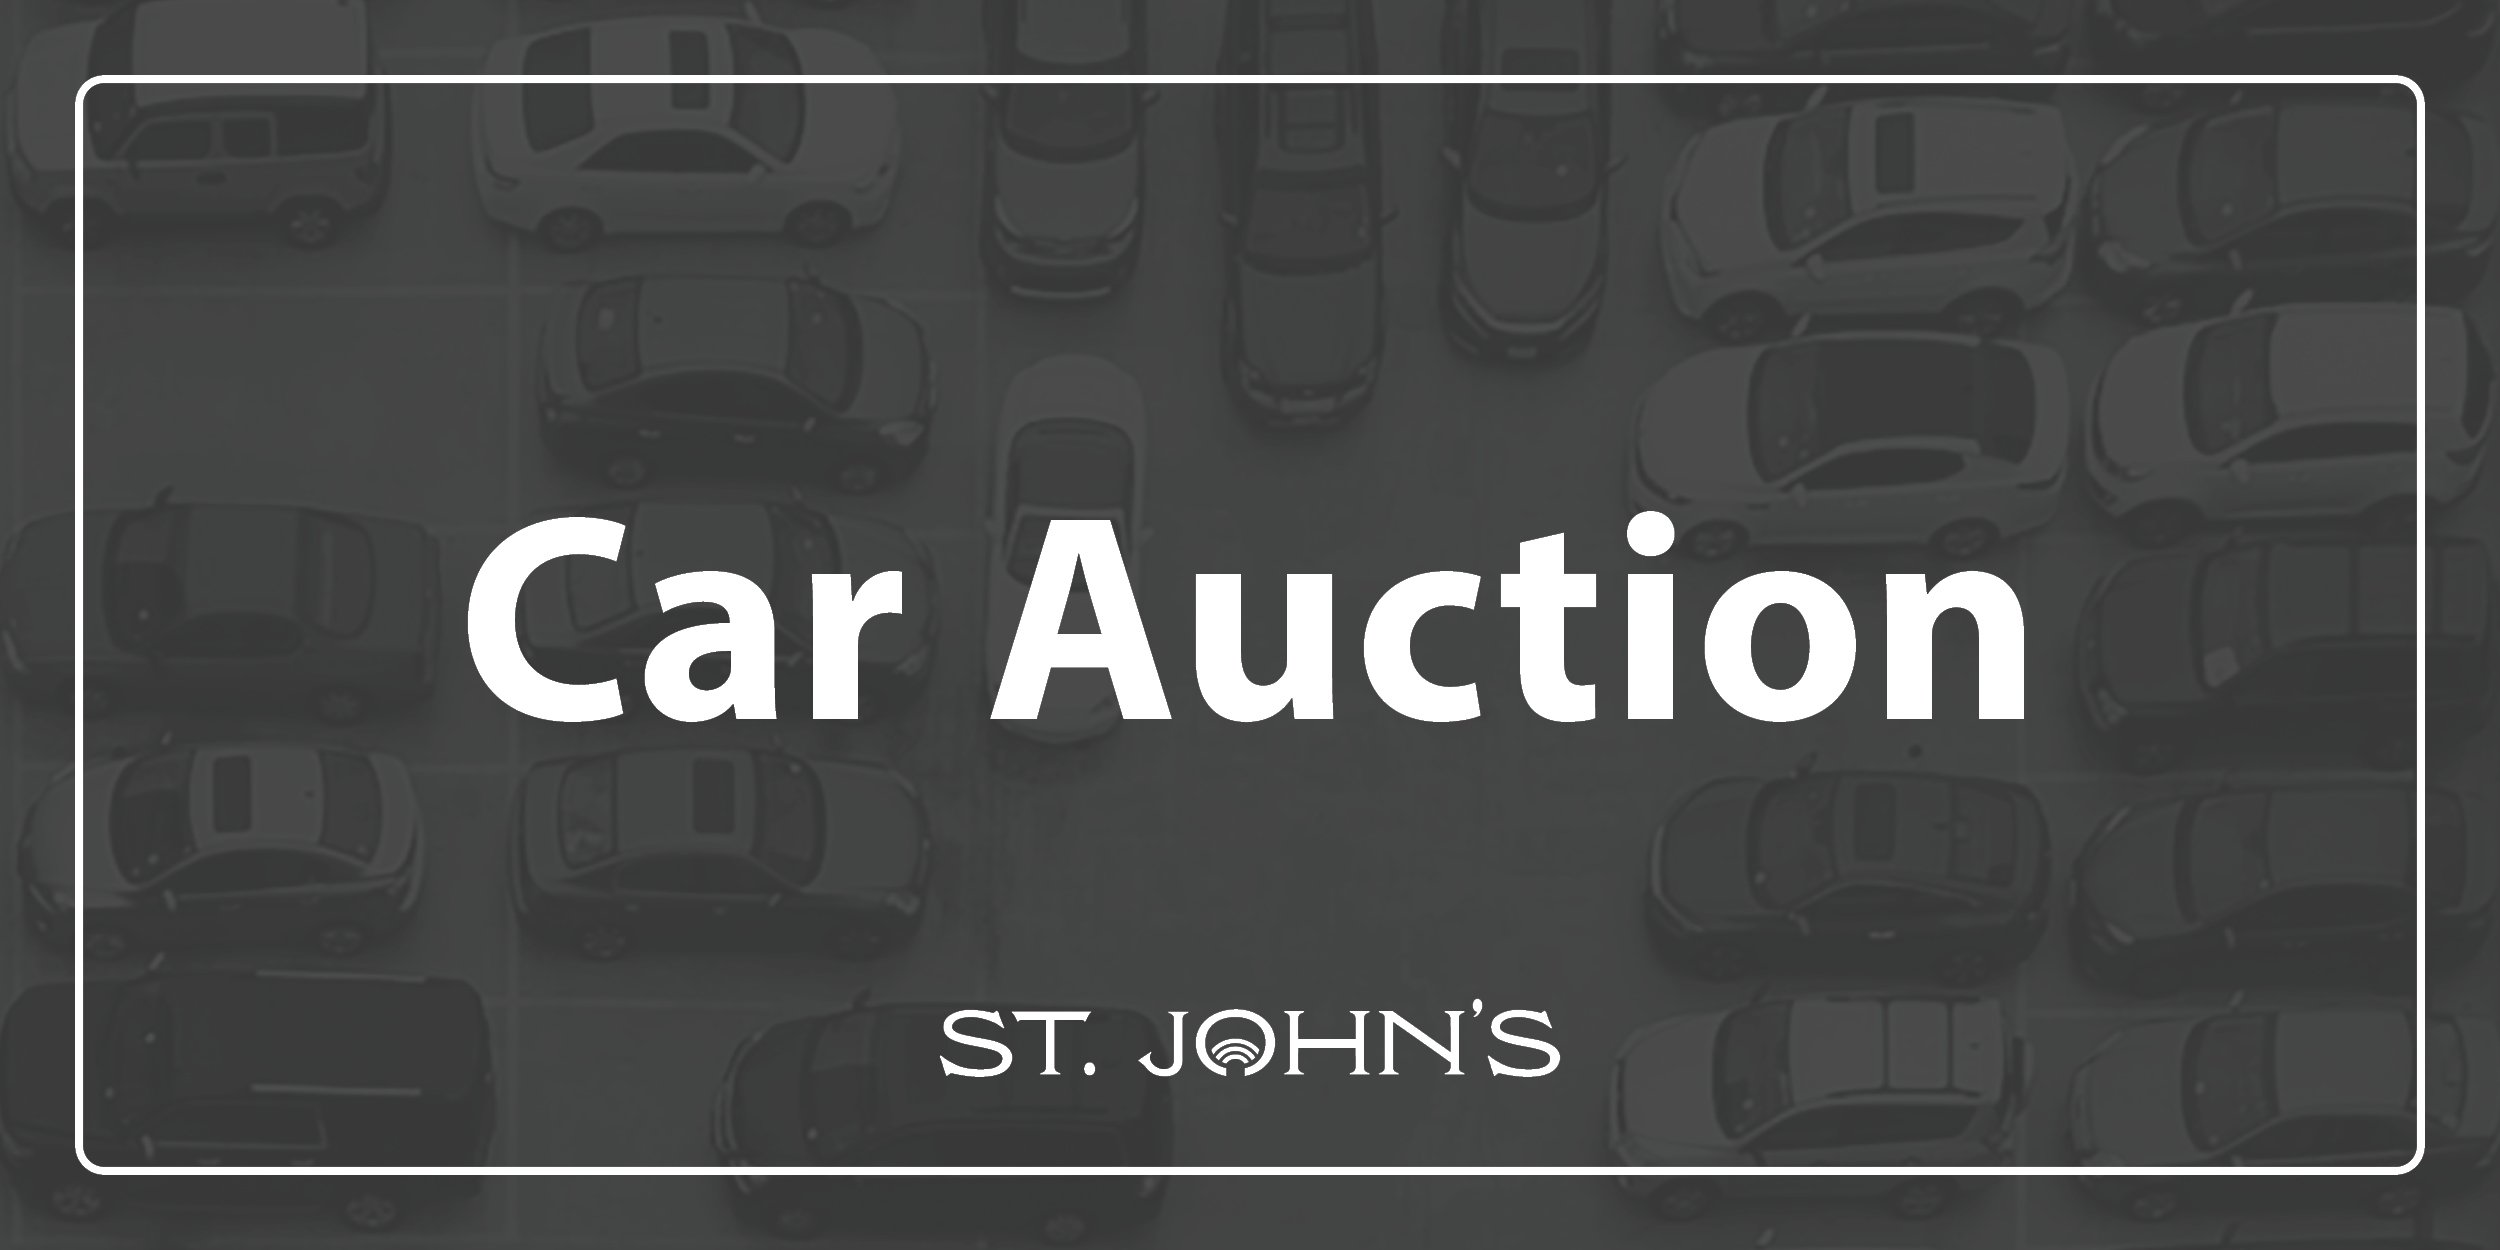 text "car auction" on a grey background